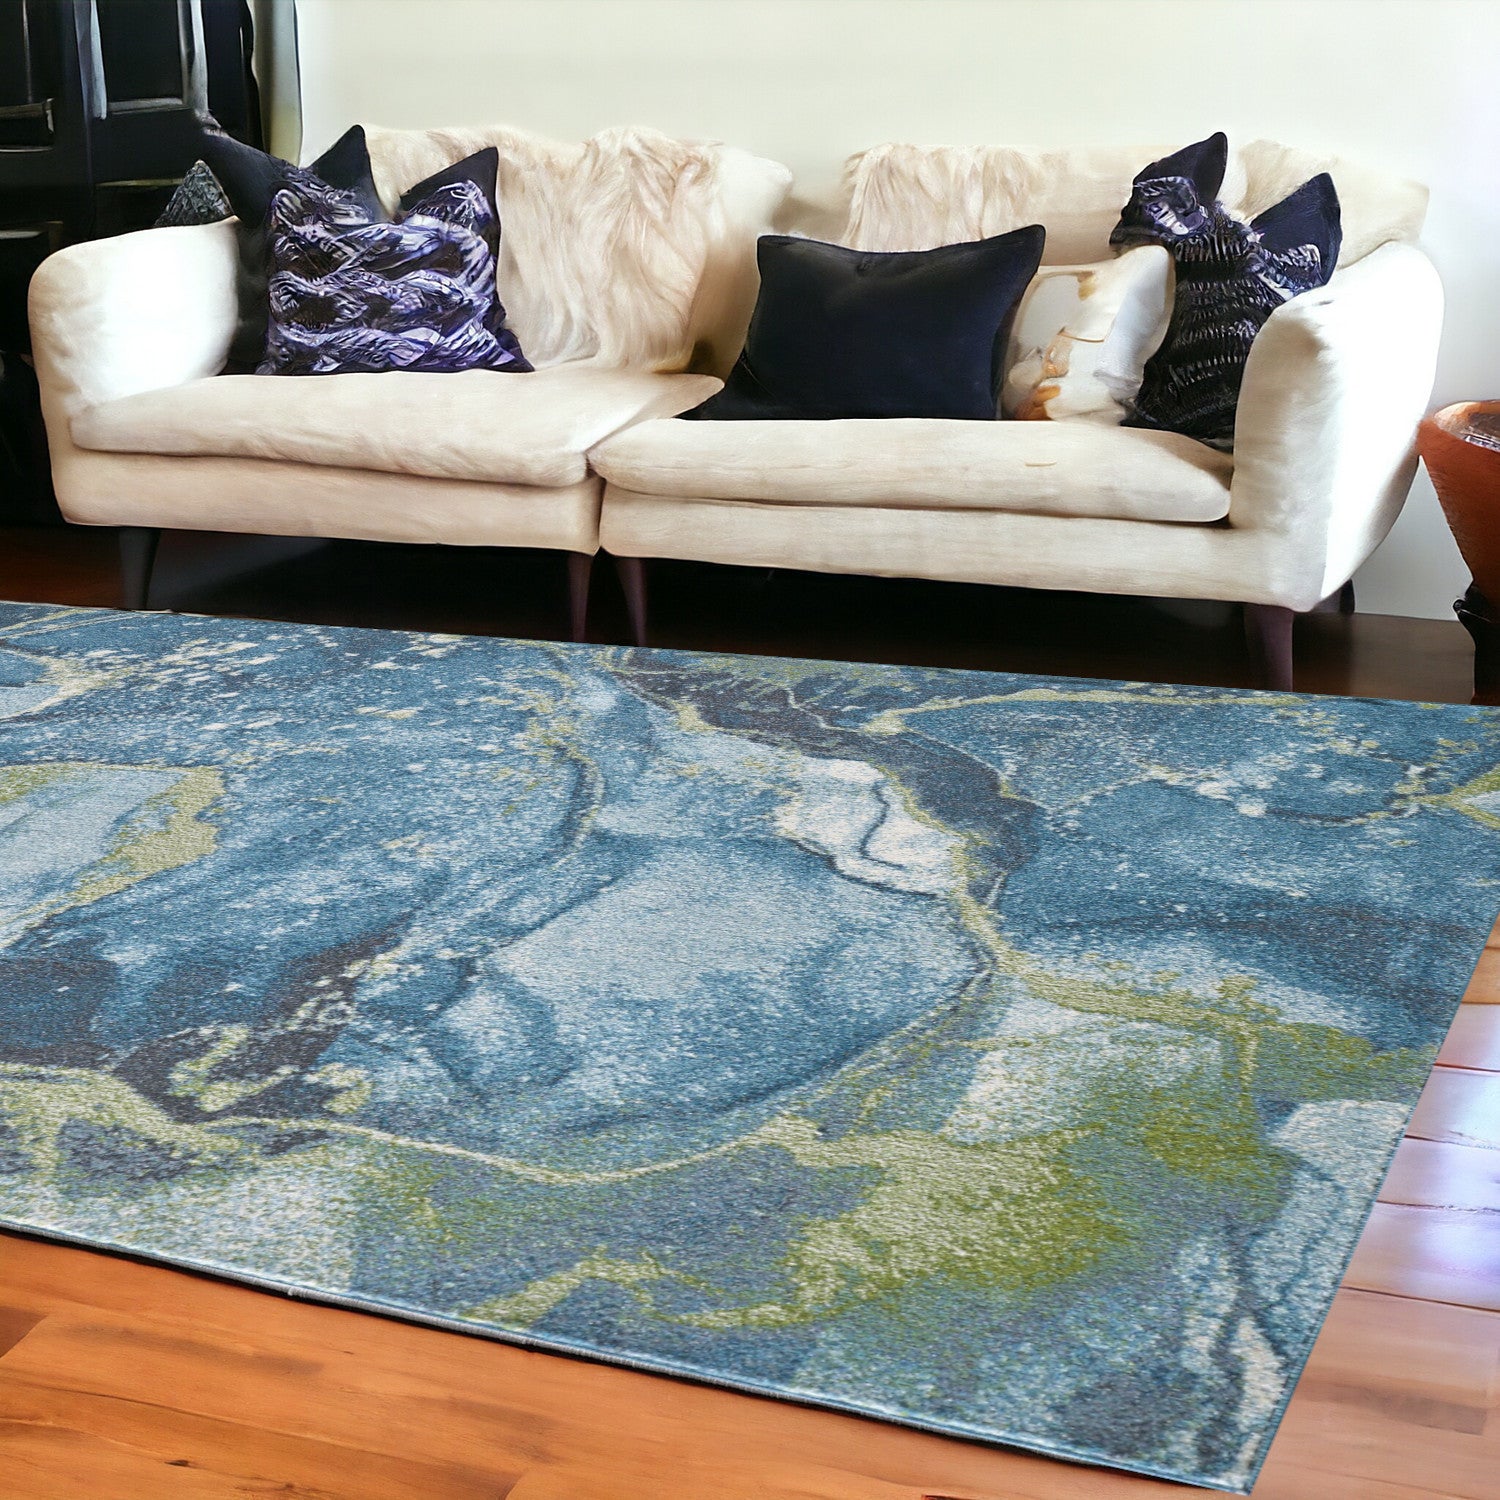 8' X 11' Teal Blue Abstract Dhurrie Area Rug